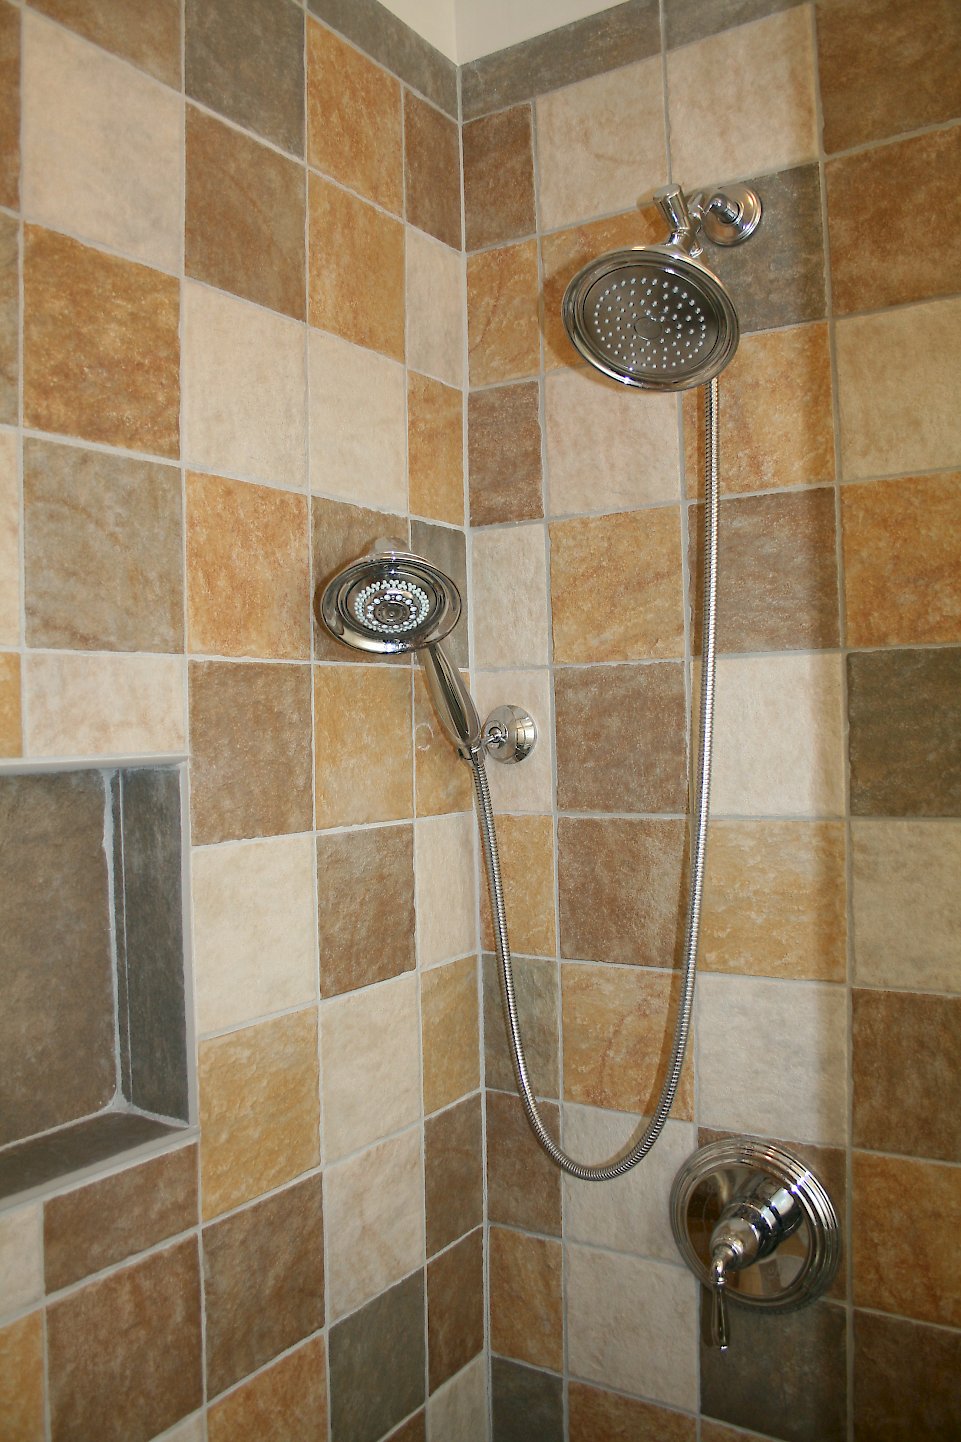 6x6 multicolored tile in the shower.